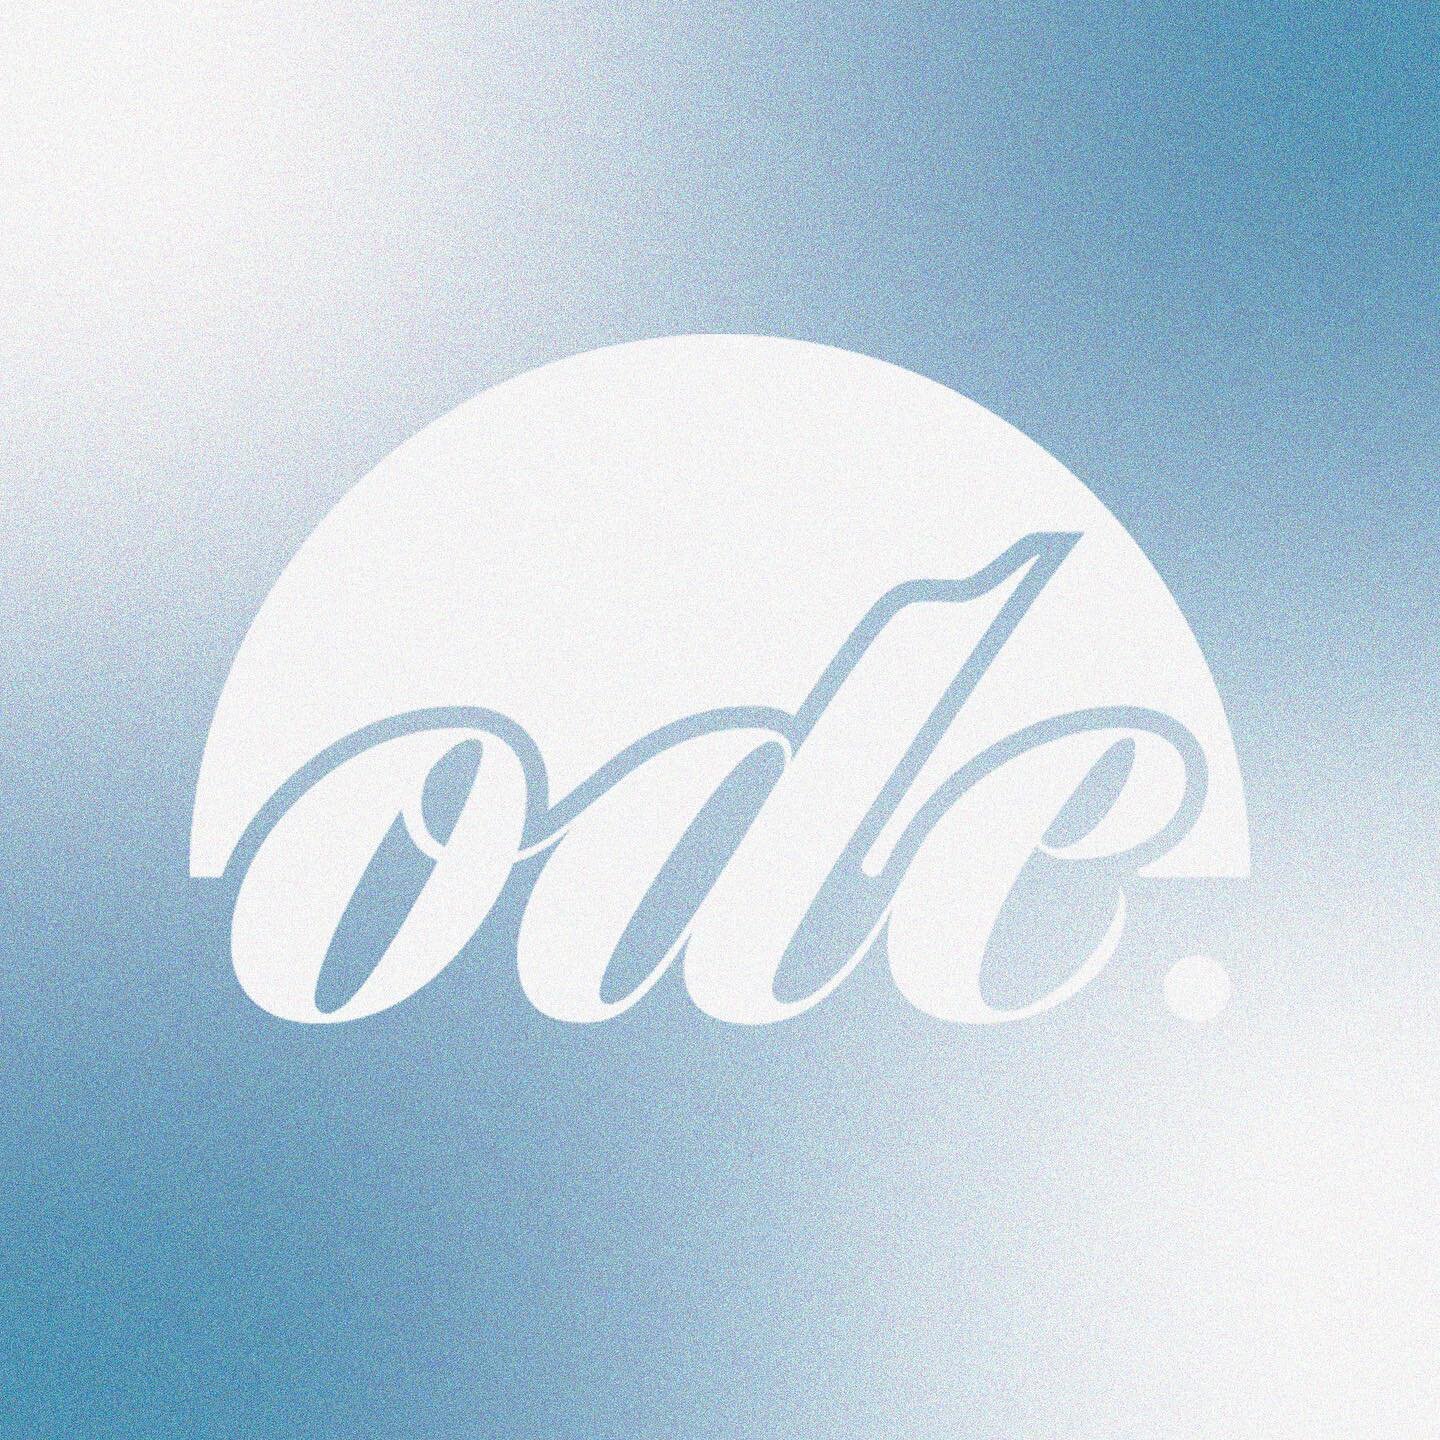 Welcome to Ode Magazine. 

Ode Magazine is a digital music magazine in tribute to the talents who make up the music industry&mdash; both in front of the crowd &amp; behind the scenes. 

Stay tuned☁️
#odemagazine